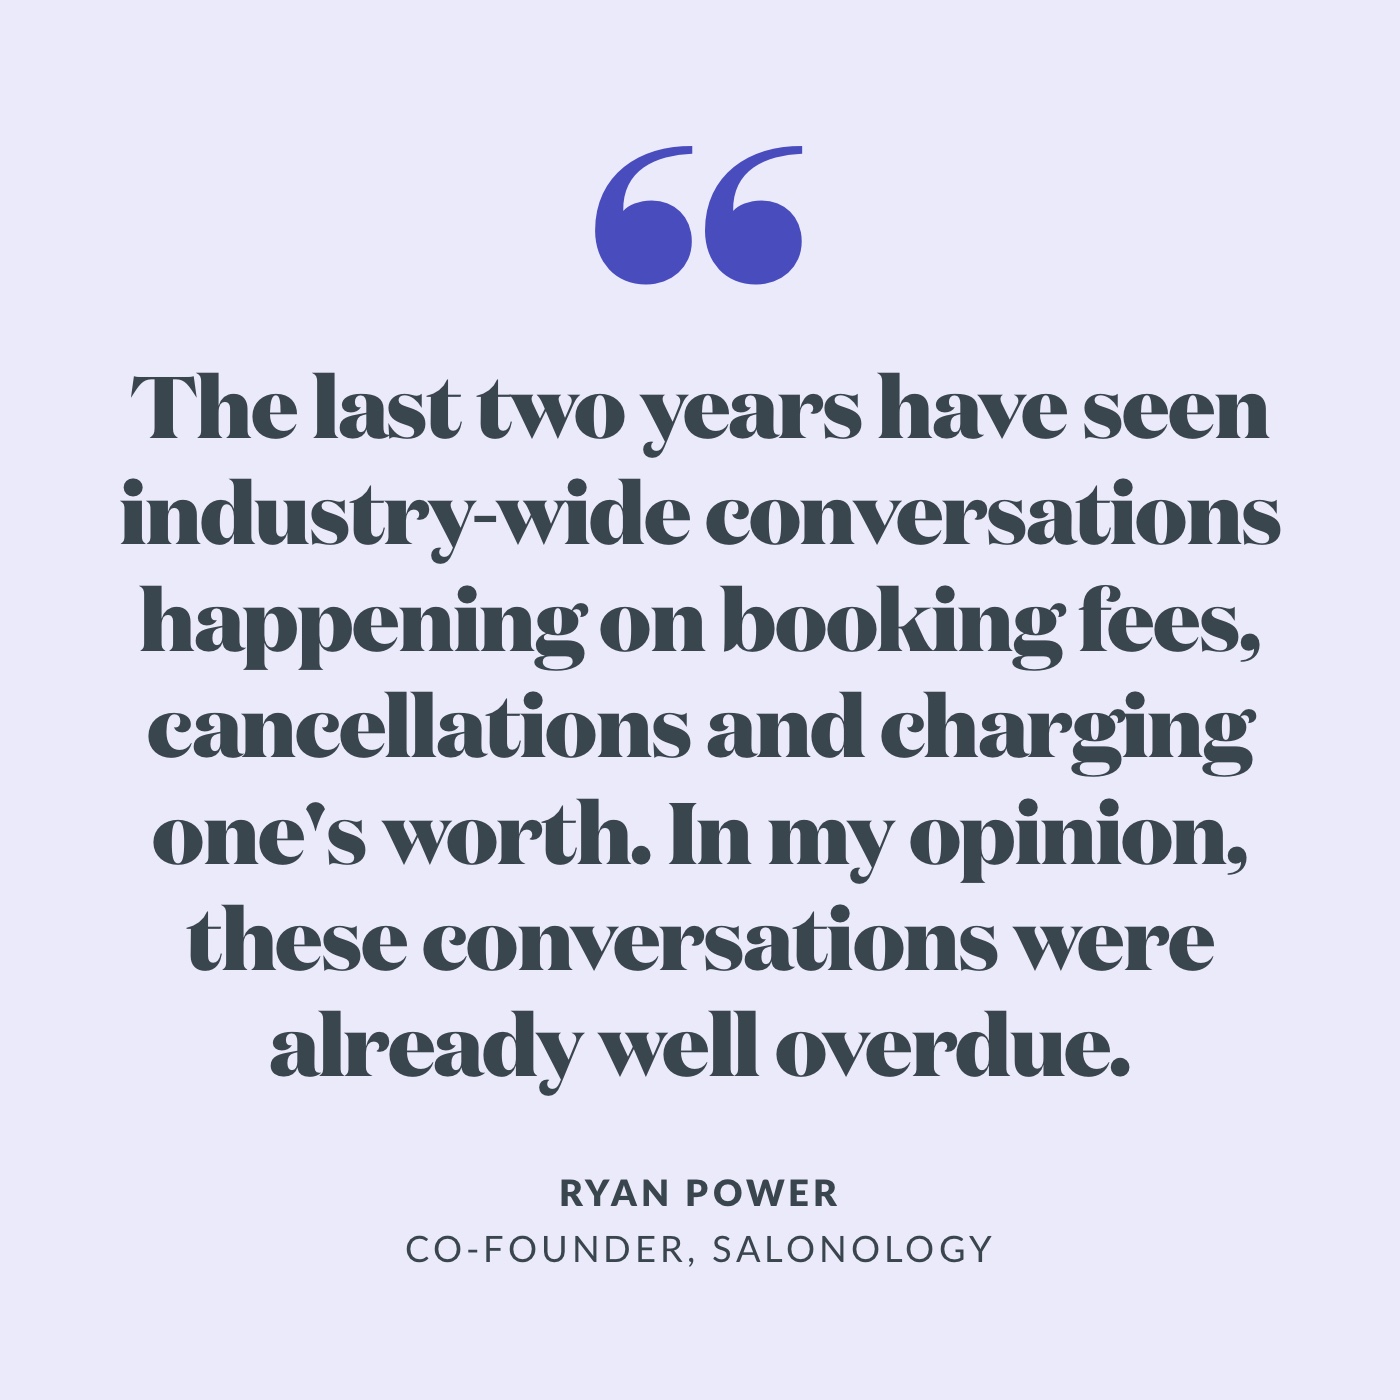 Quote: "the last two years have seen industry-wide conversations happening on booking fees, cancellations and charging one's worth. In my opinion, these conversations were already well overdue."